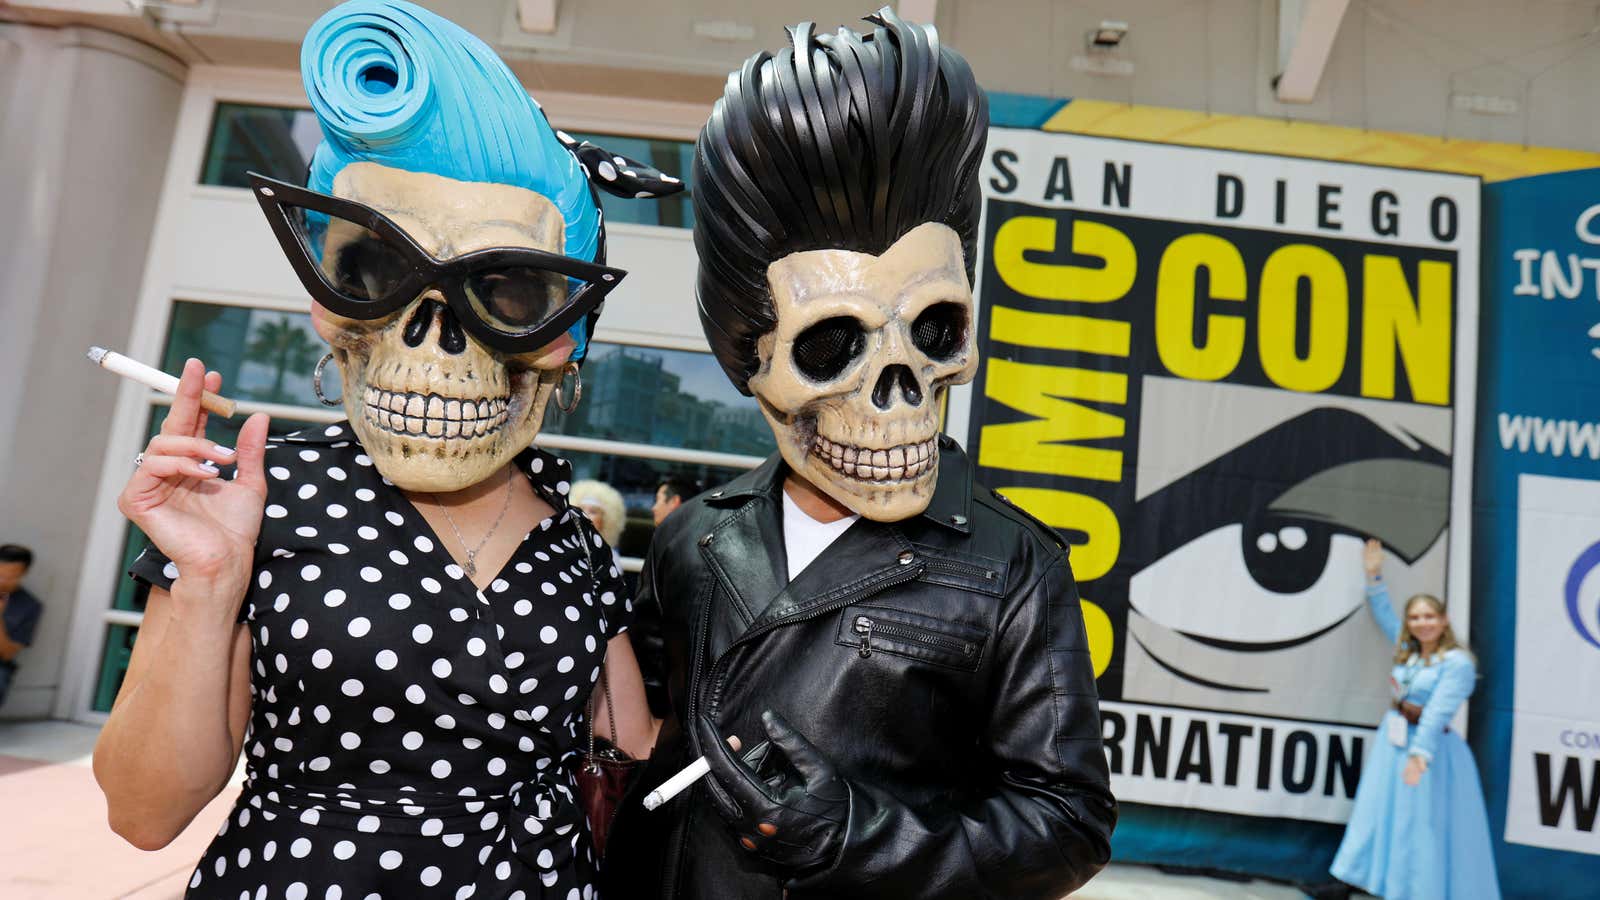 A slew of new shows were featured at Comic Con in San Diego over the weekend.